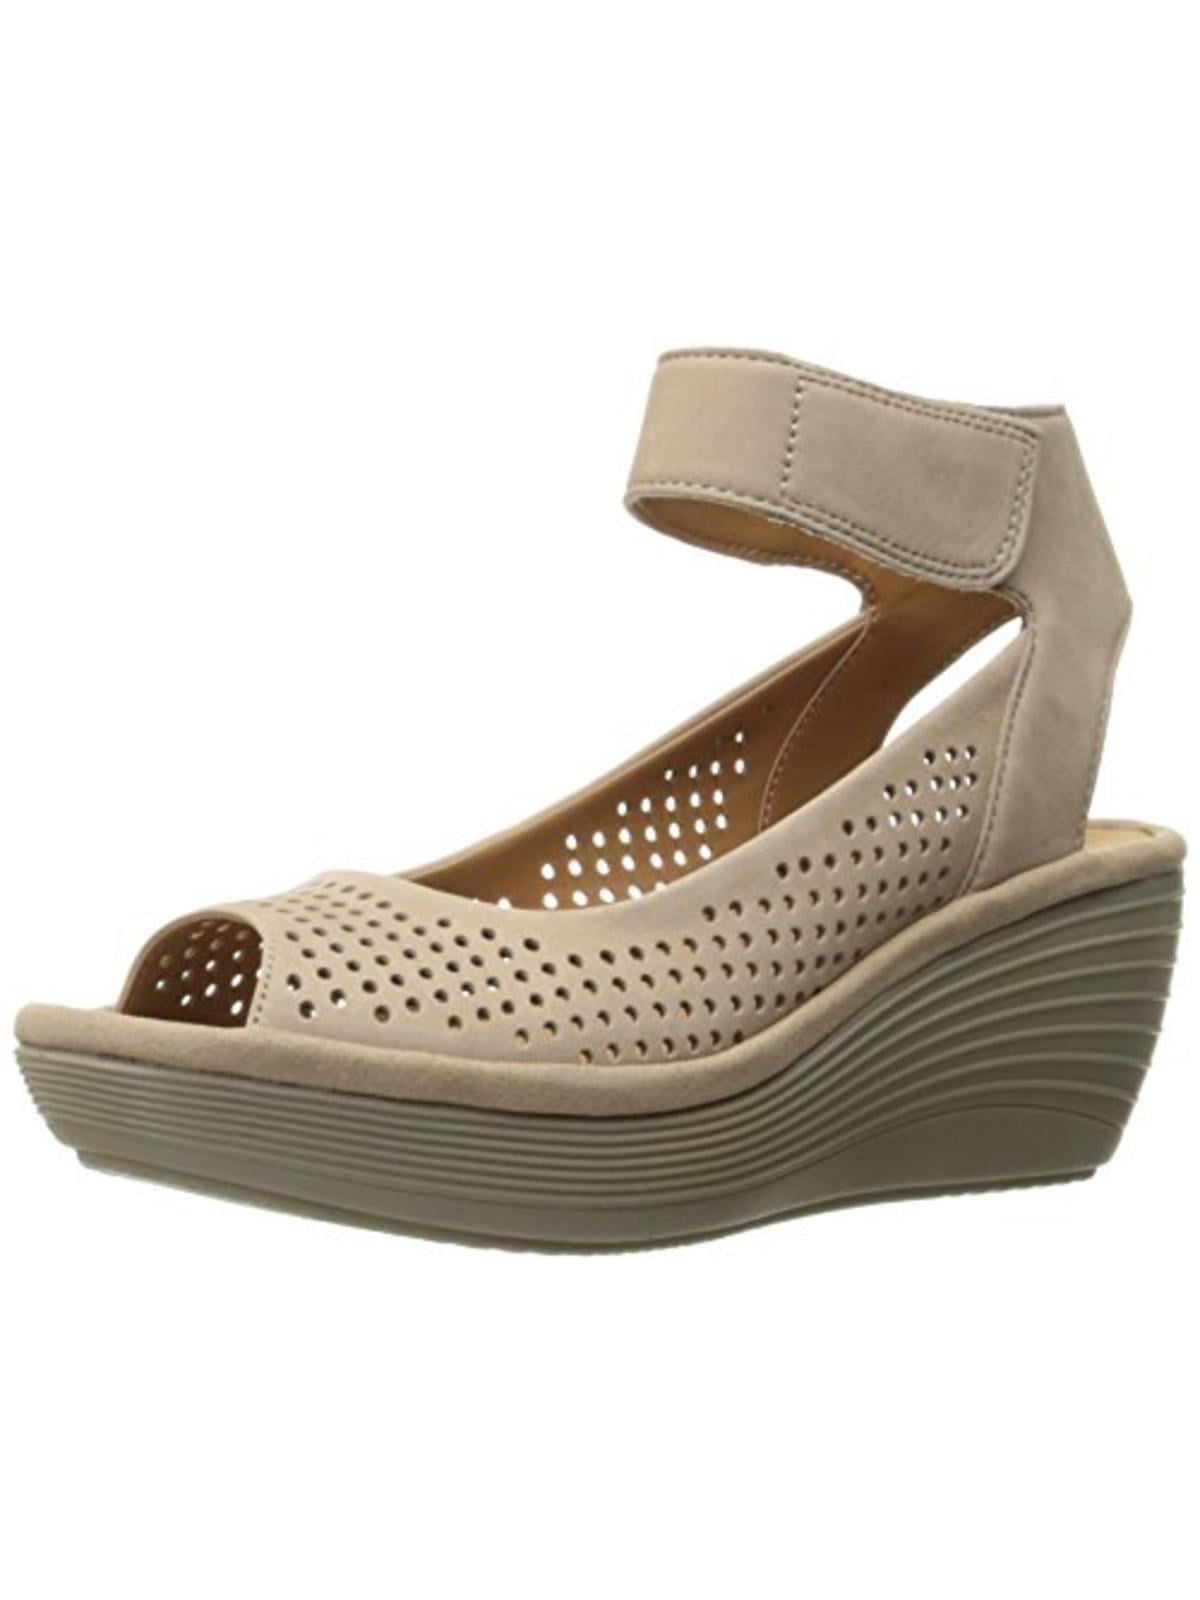 clarks nubuck leather perforated heeled sandals